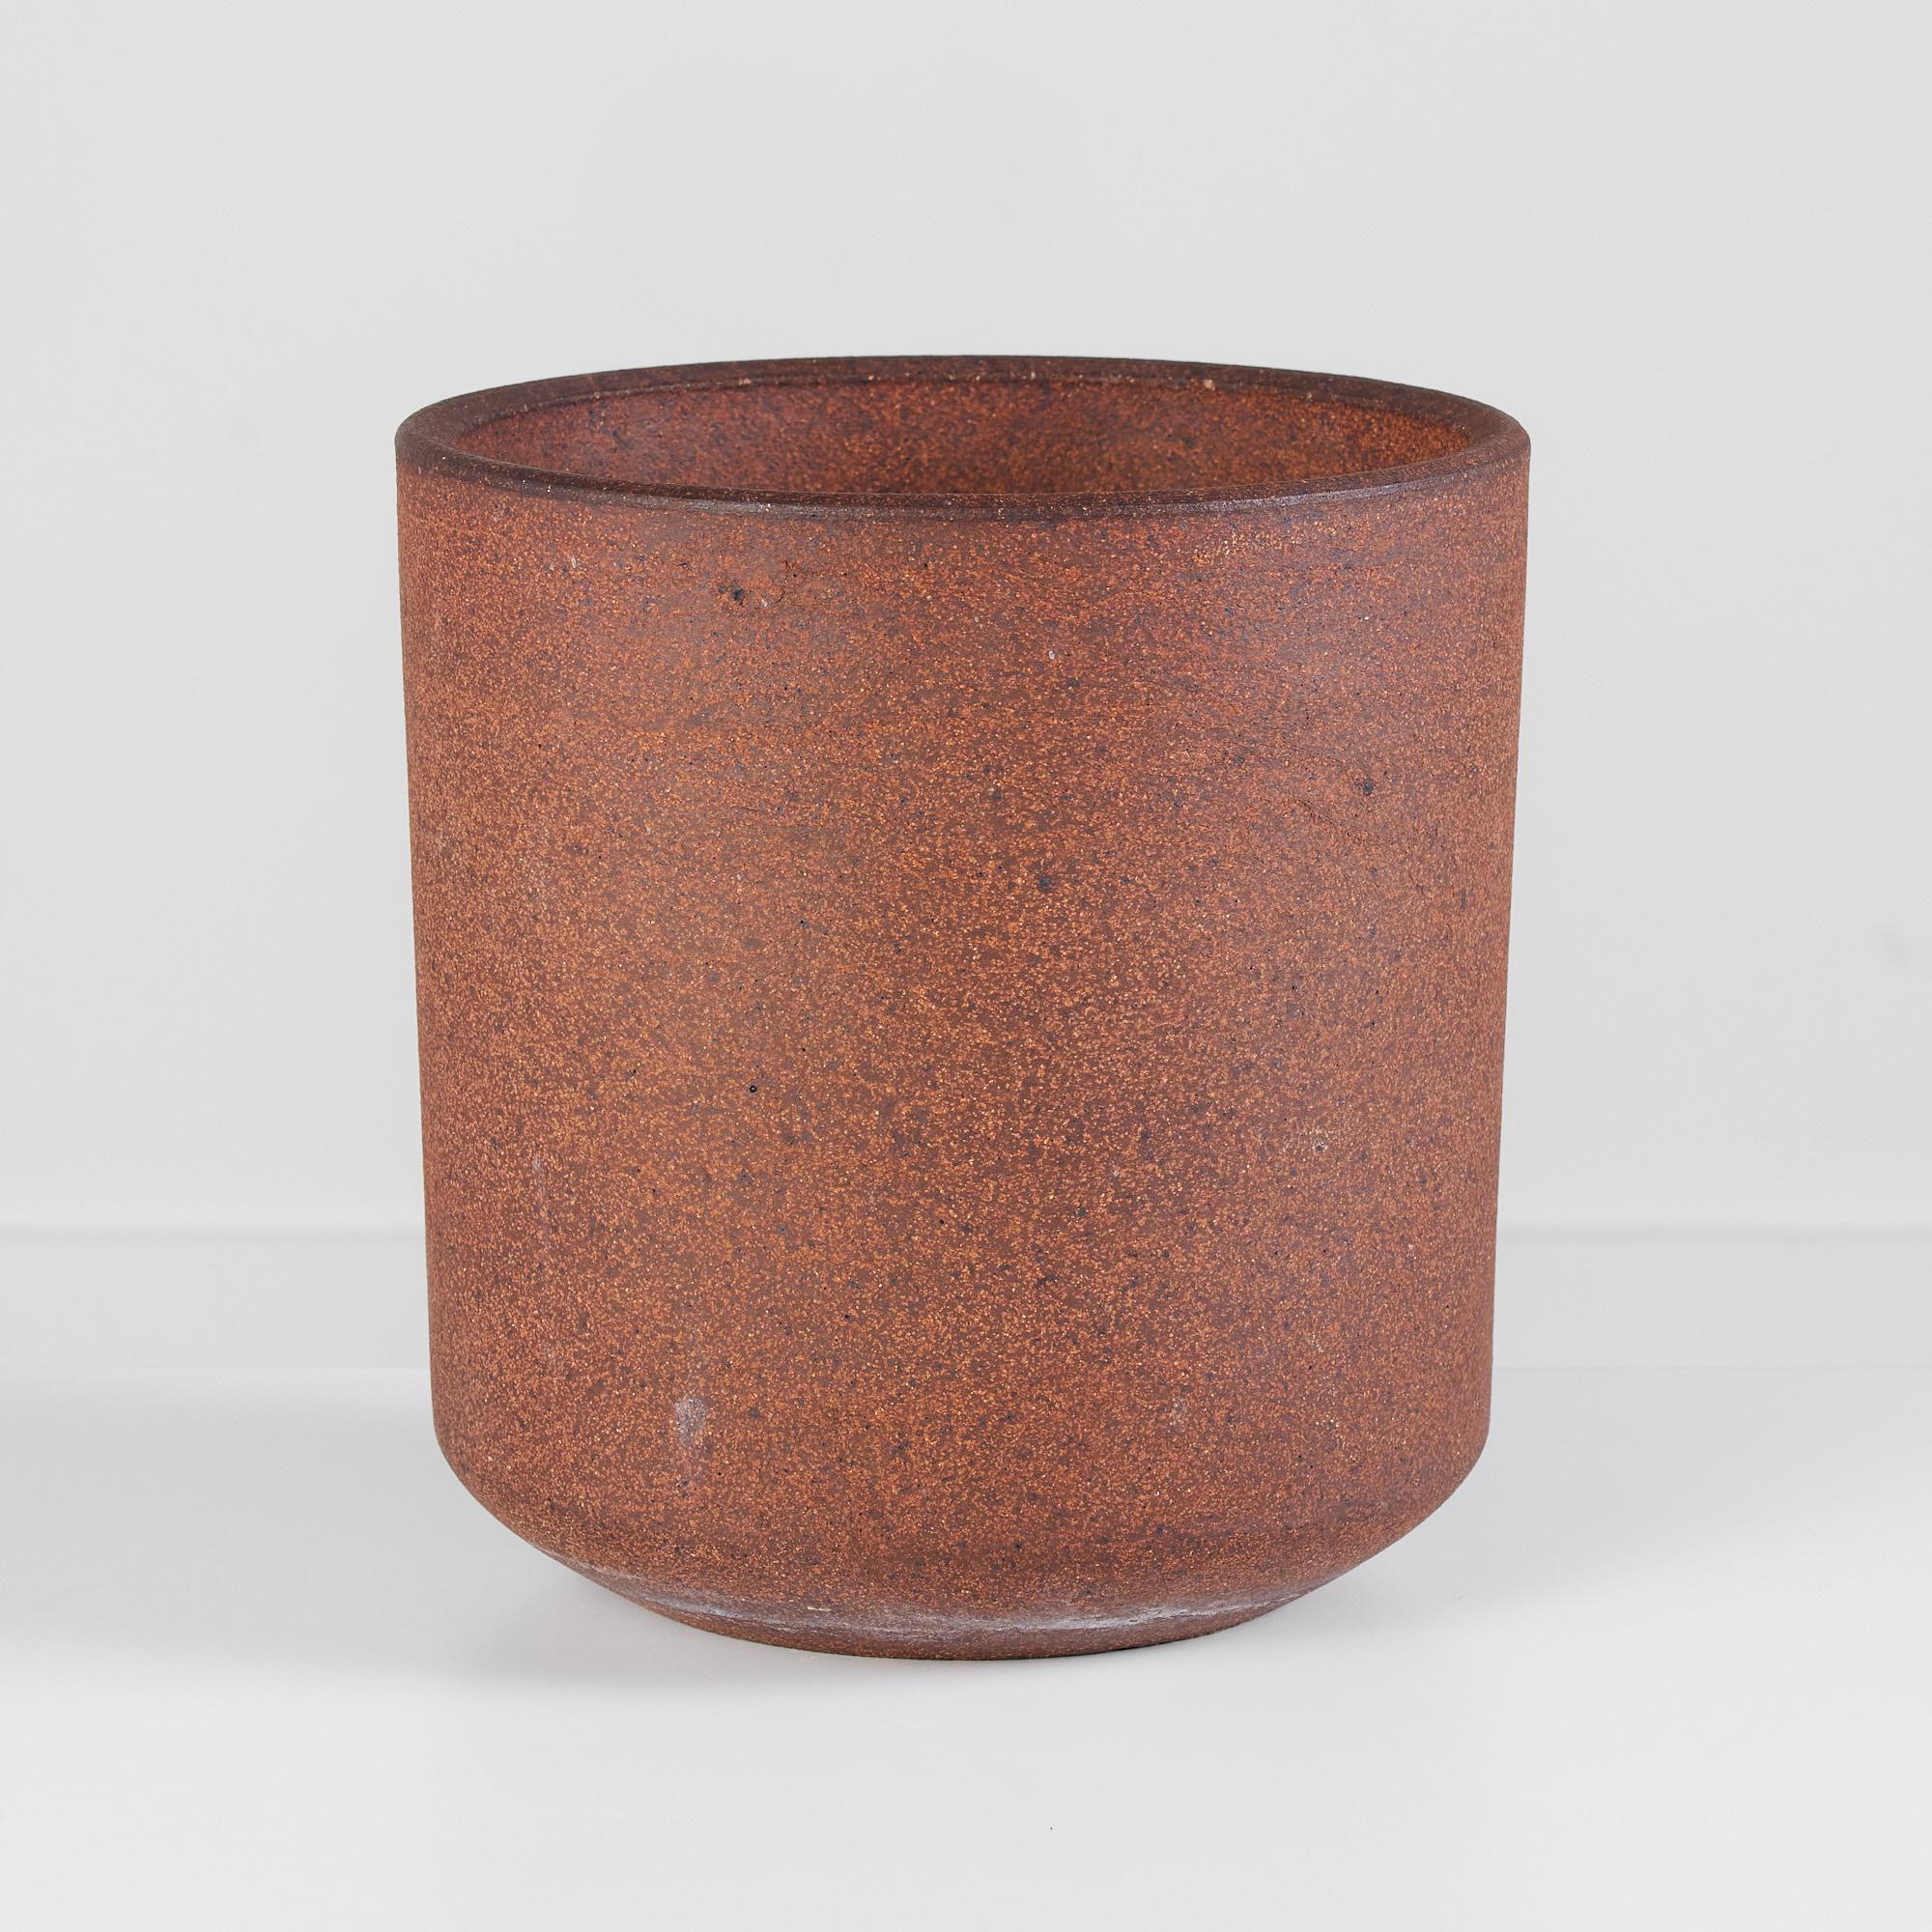 Lagardo Tackett unglazed stoneware planter for Architectural Pottery. This cylindrical example is lightly textured with a speckled interior and exterior.

Dimensions: 10.25” diameter x 10.25” height. 

Condition: Good vintage condition;